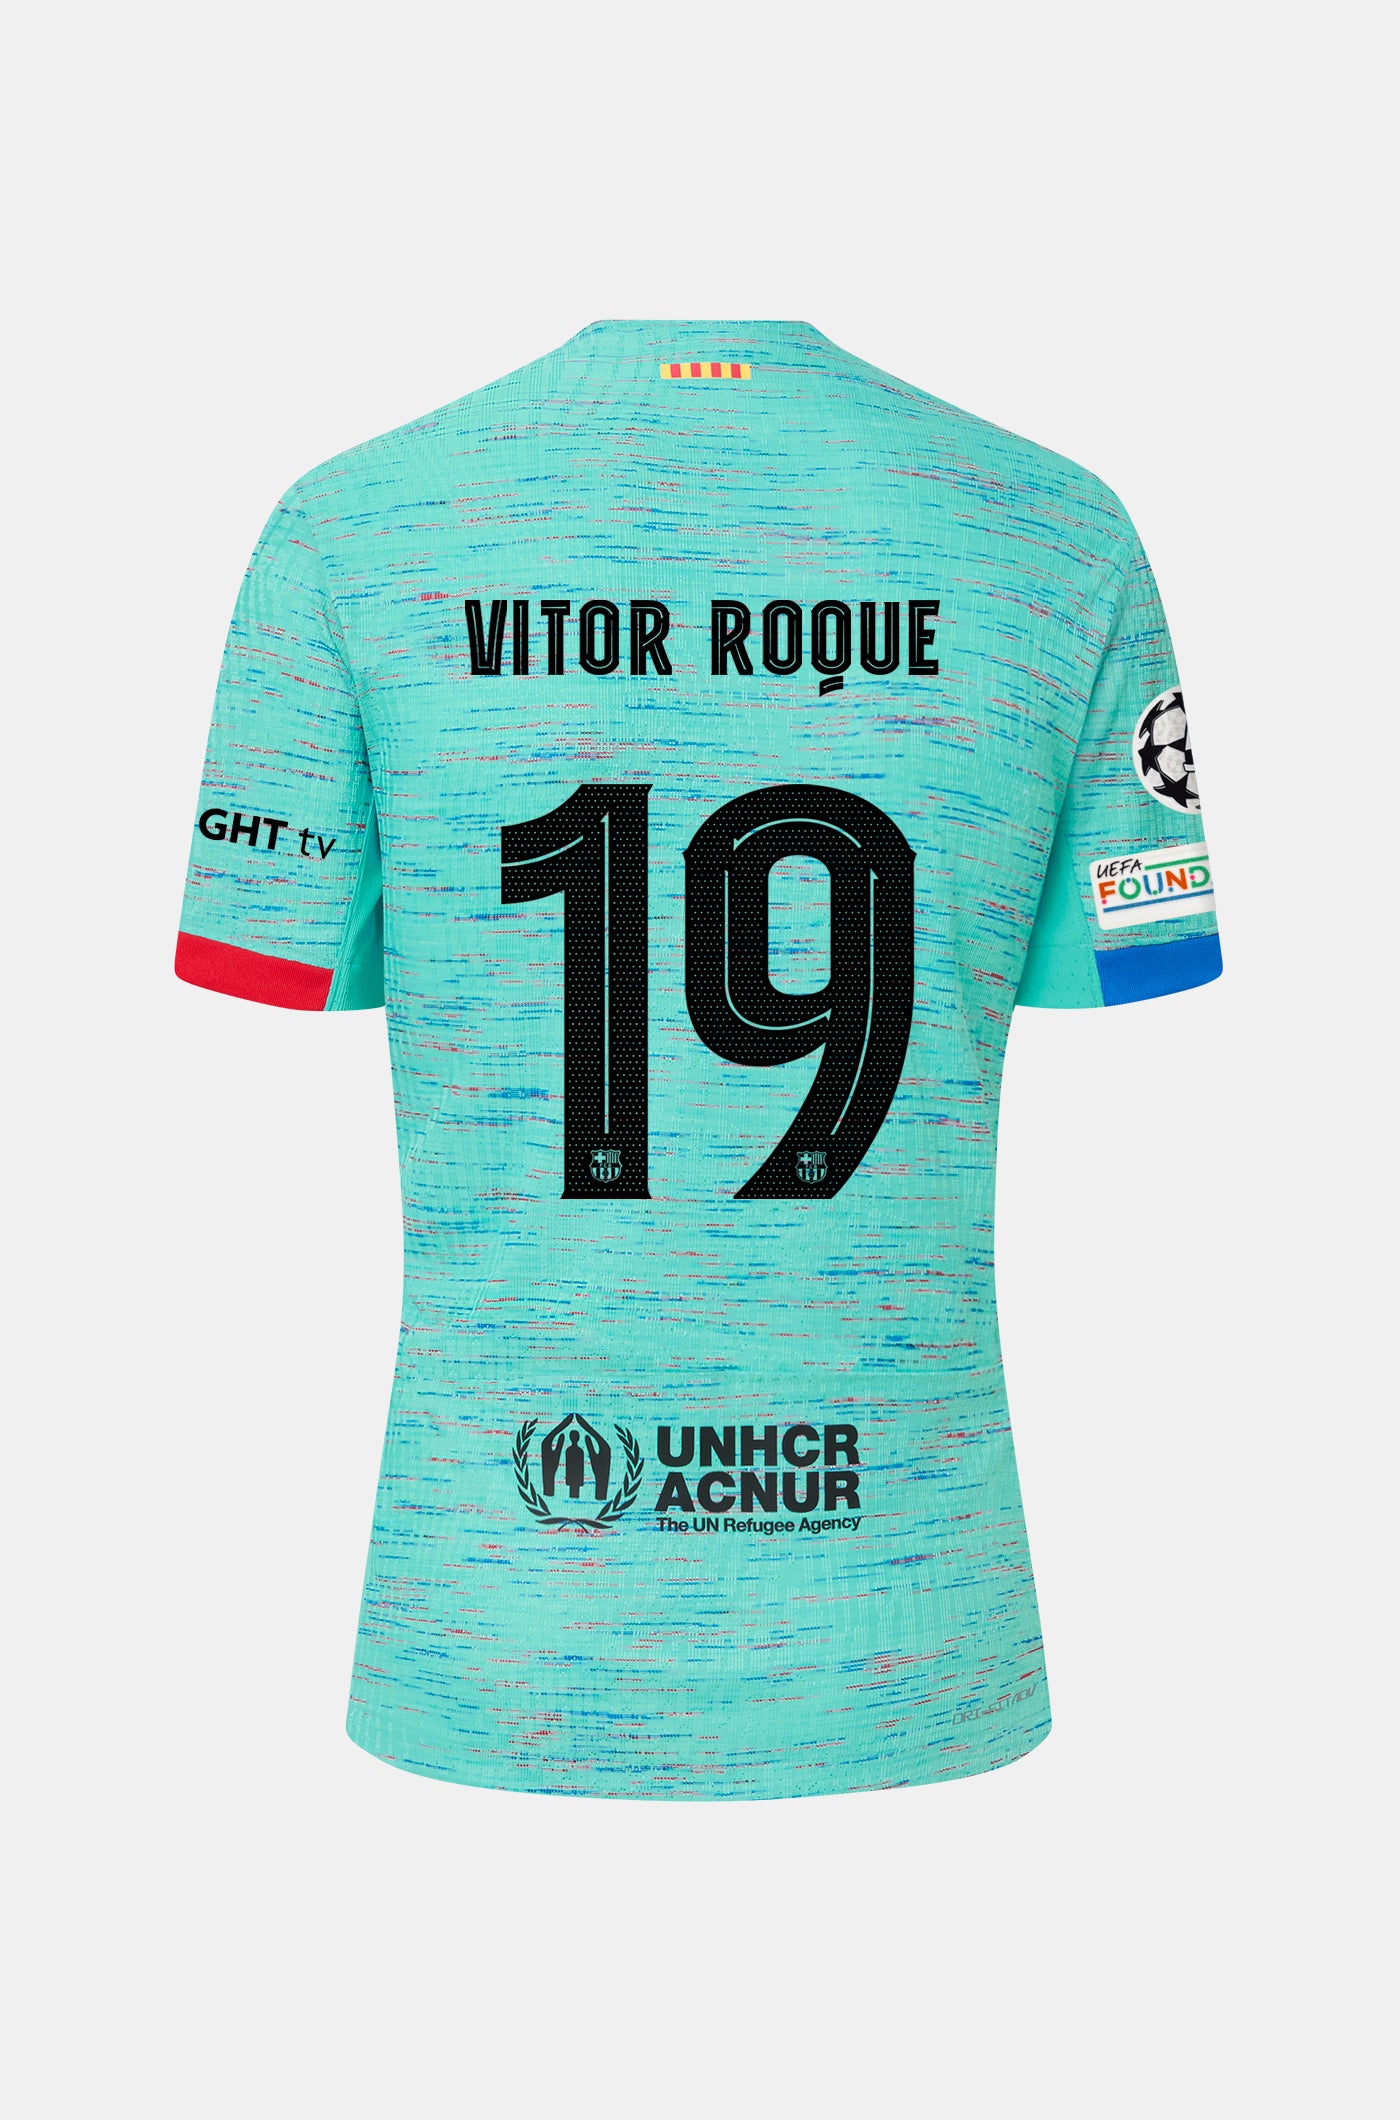 UCL FC Barcelona third shirt 23/24 Player’s Edition - VITOR ROQUE